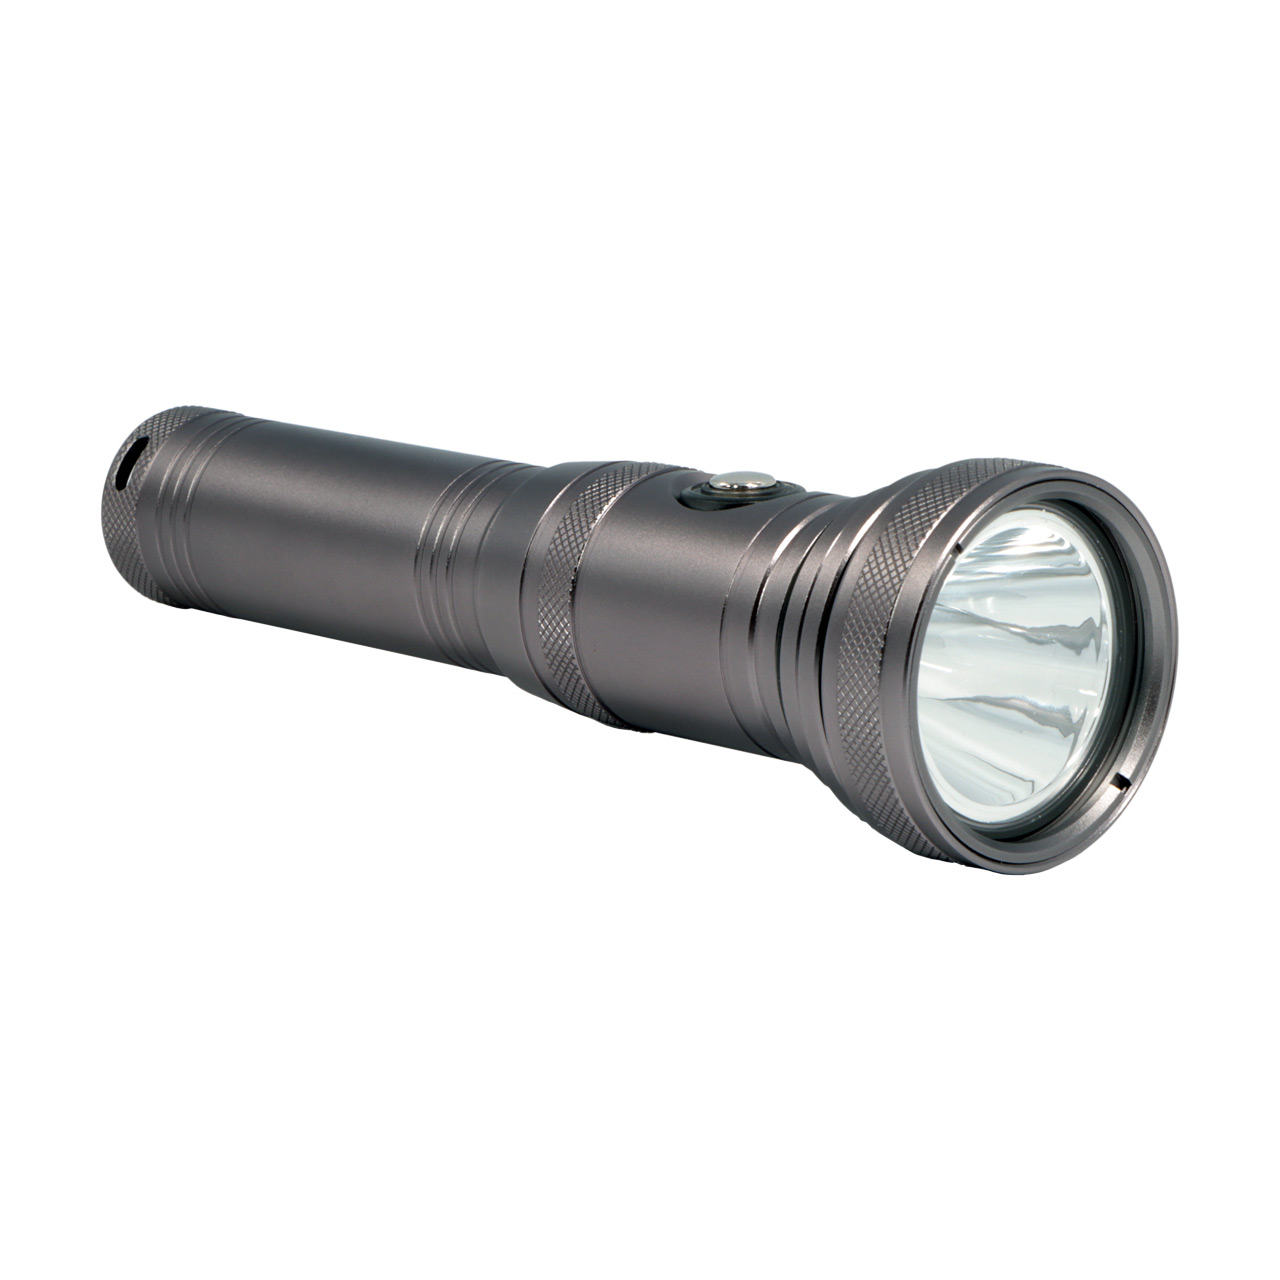 HYPERION FL1000LM Torch with Battery & Charger